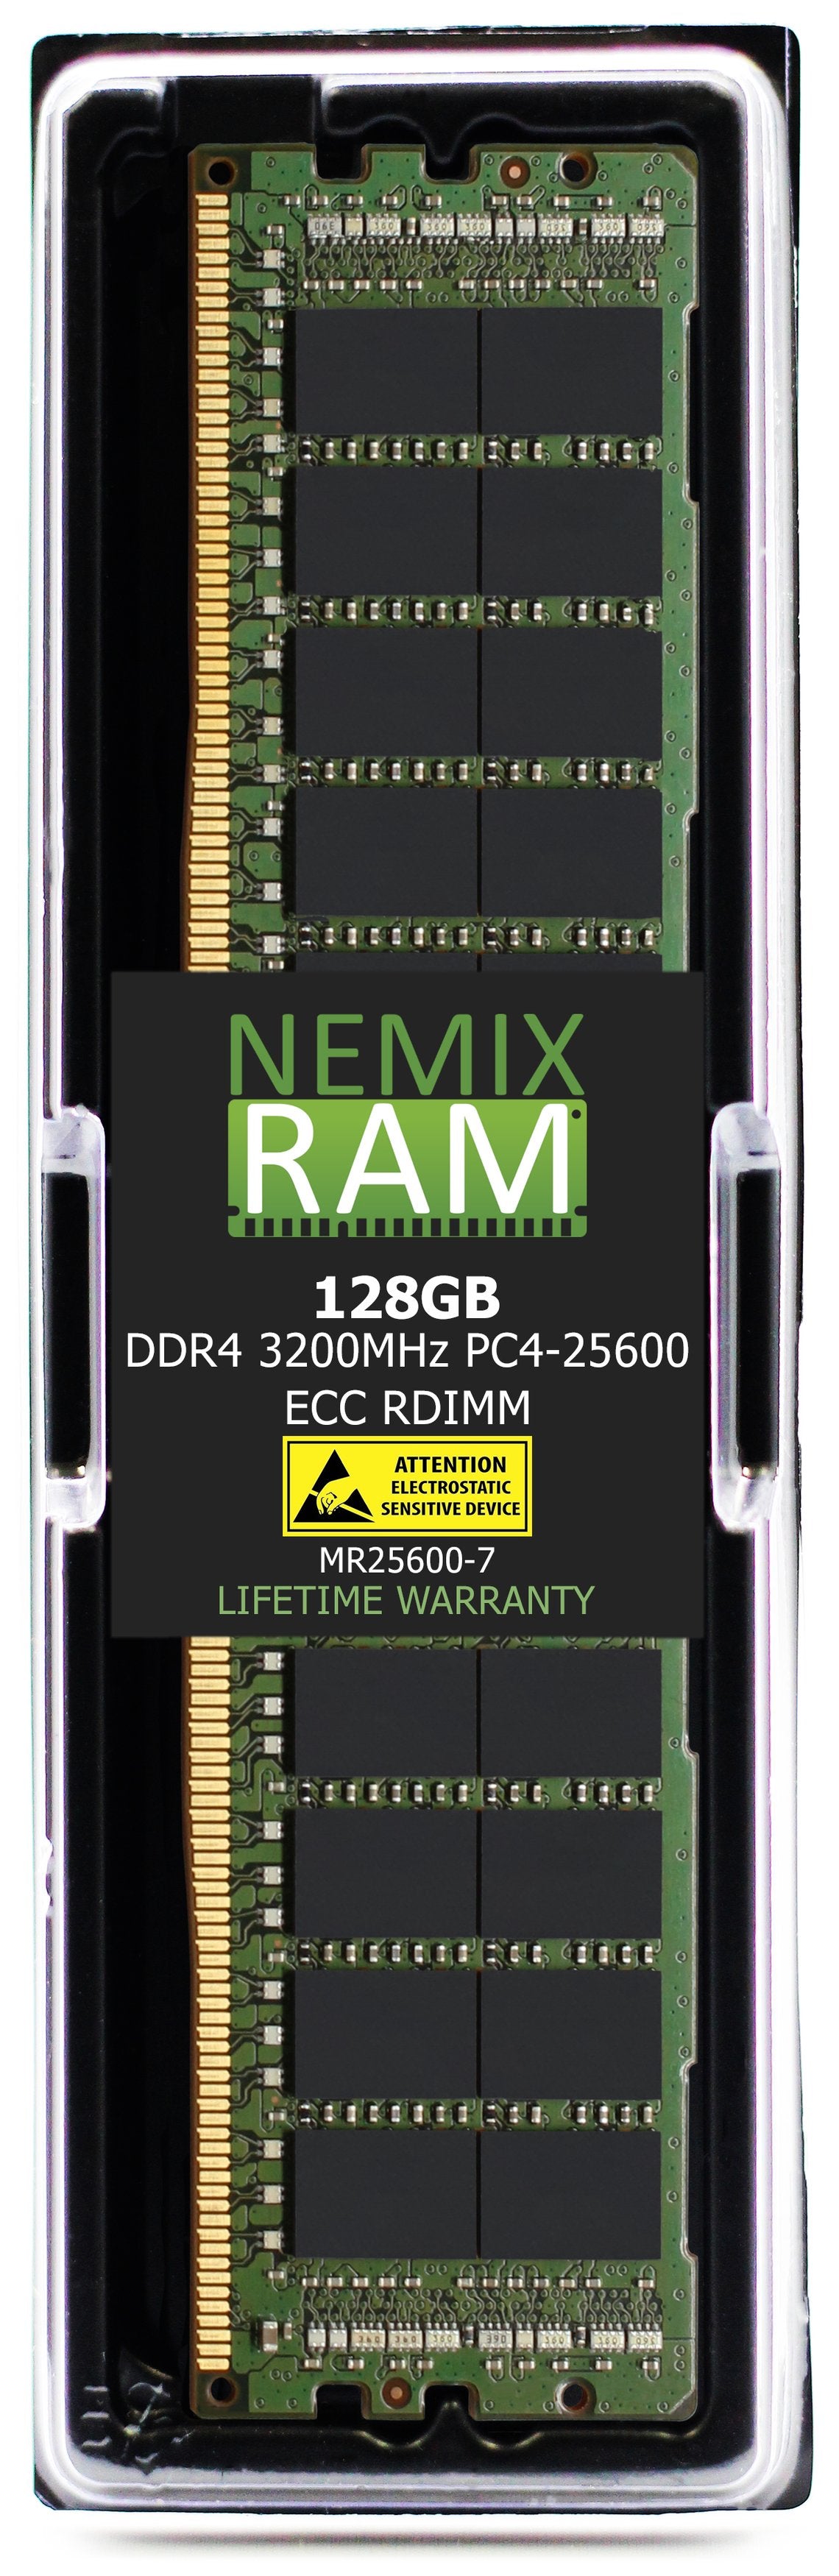 128GB DDR4 3200MHZ PC4-25600 RDIMM Compatible with Supermicro MEM-DR412MH-ER32